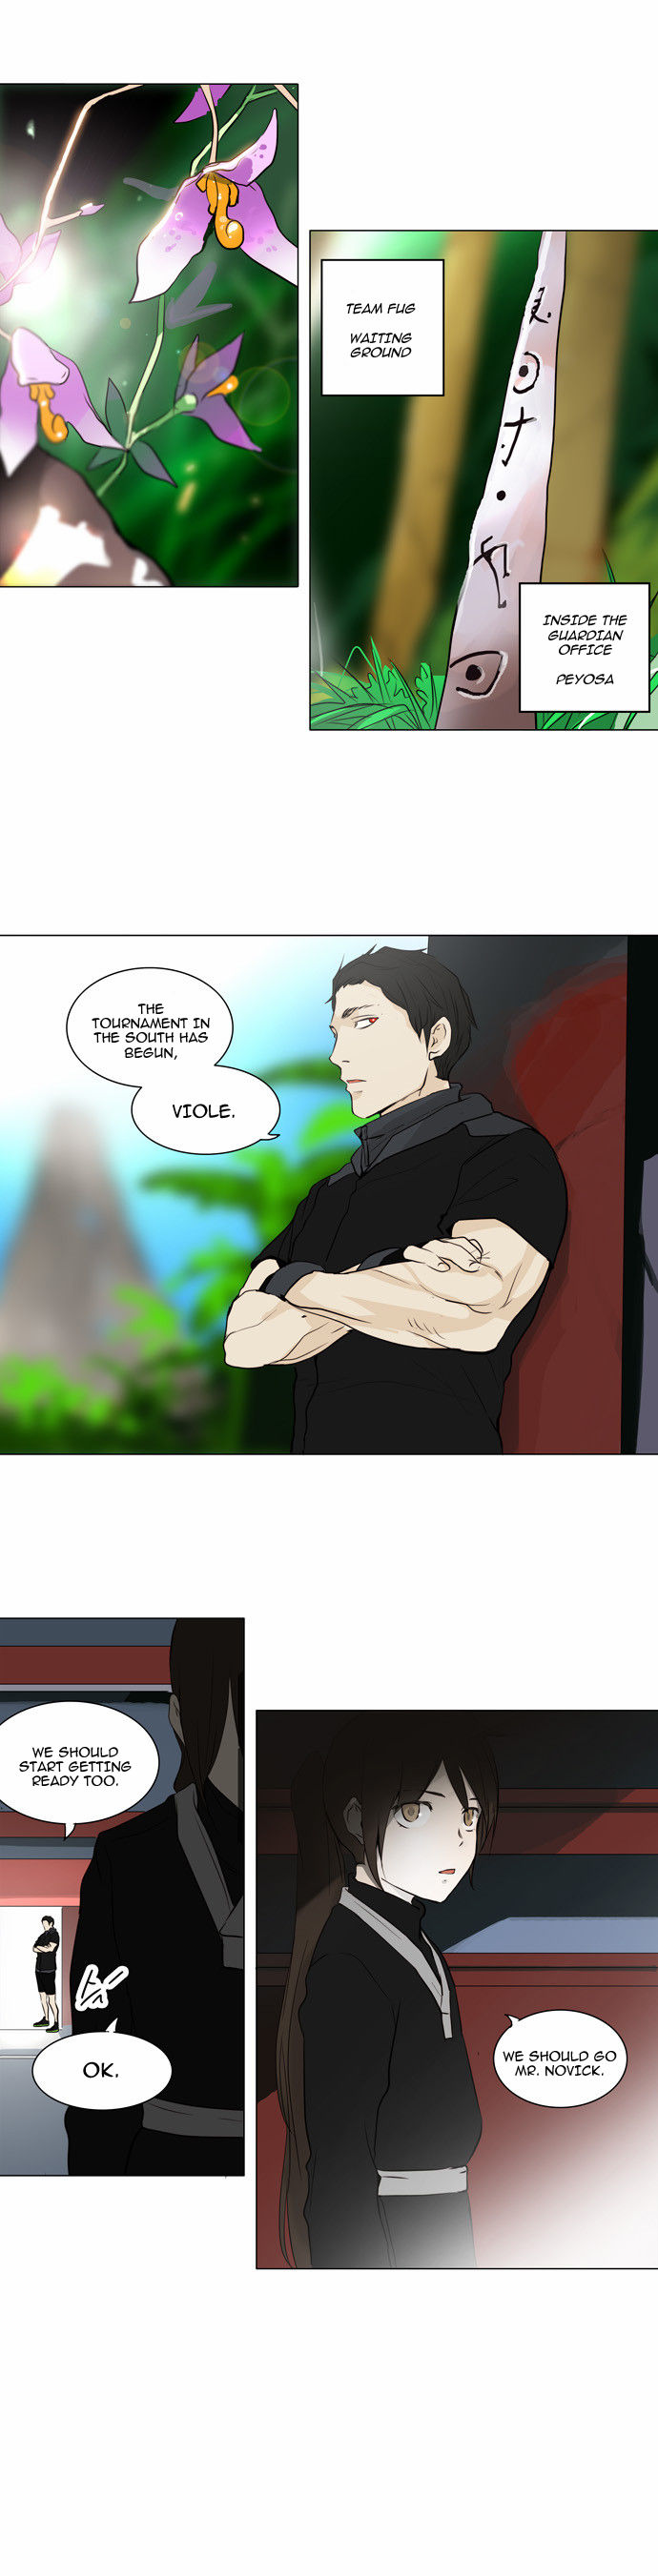 Tower of God 161